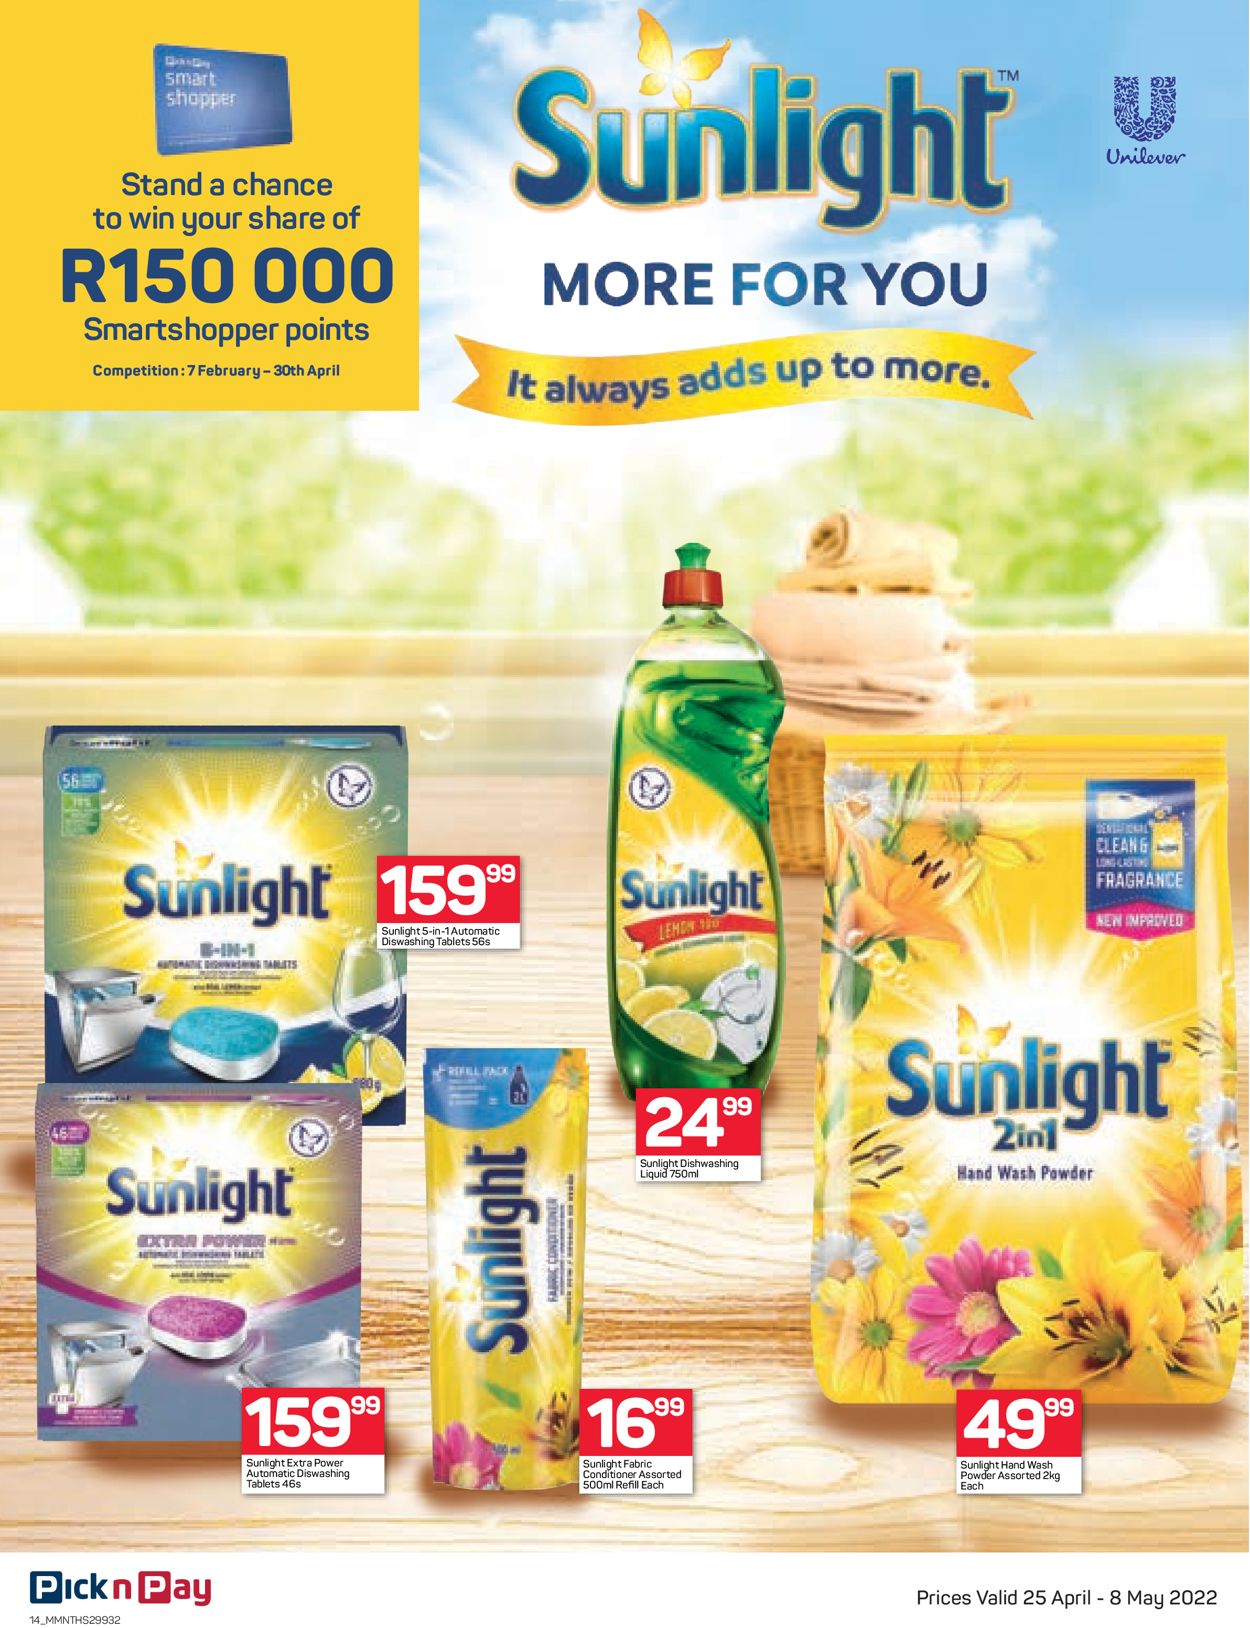 Pick n Pay Catalogue - 2022/04/25-2022/05/08 (Page 14)